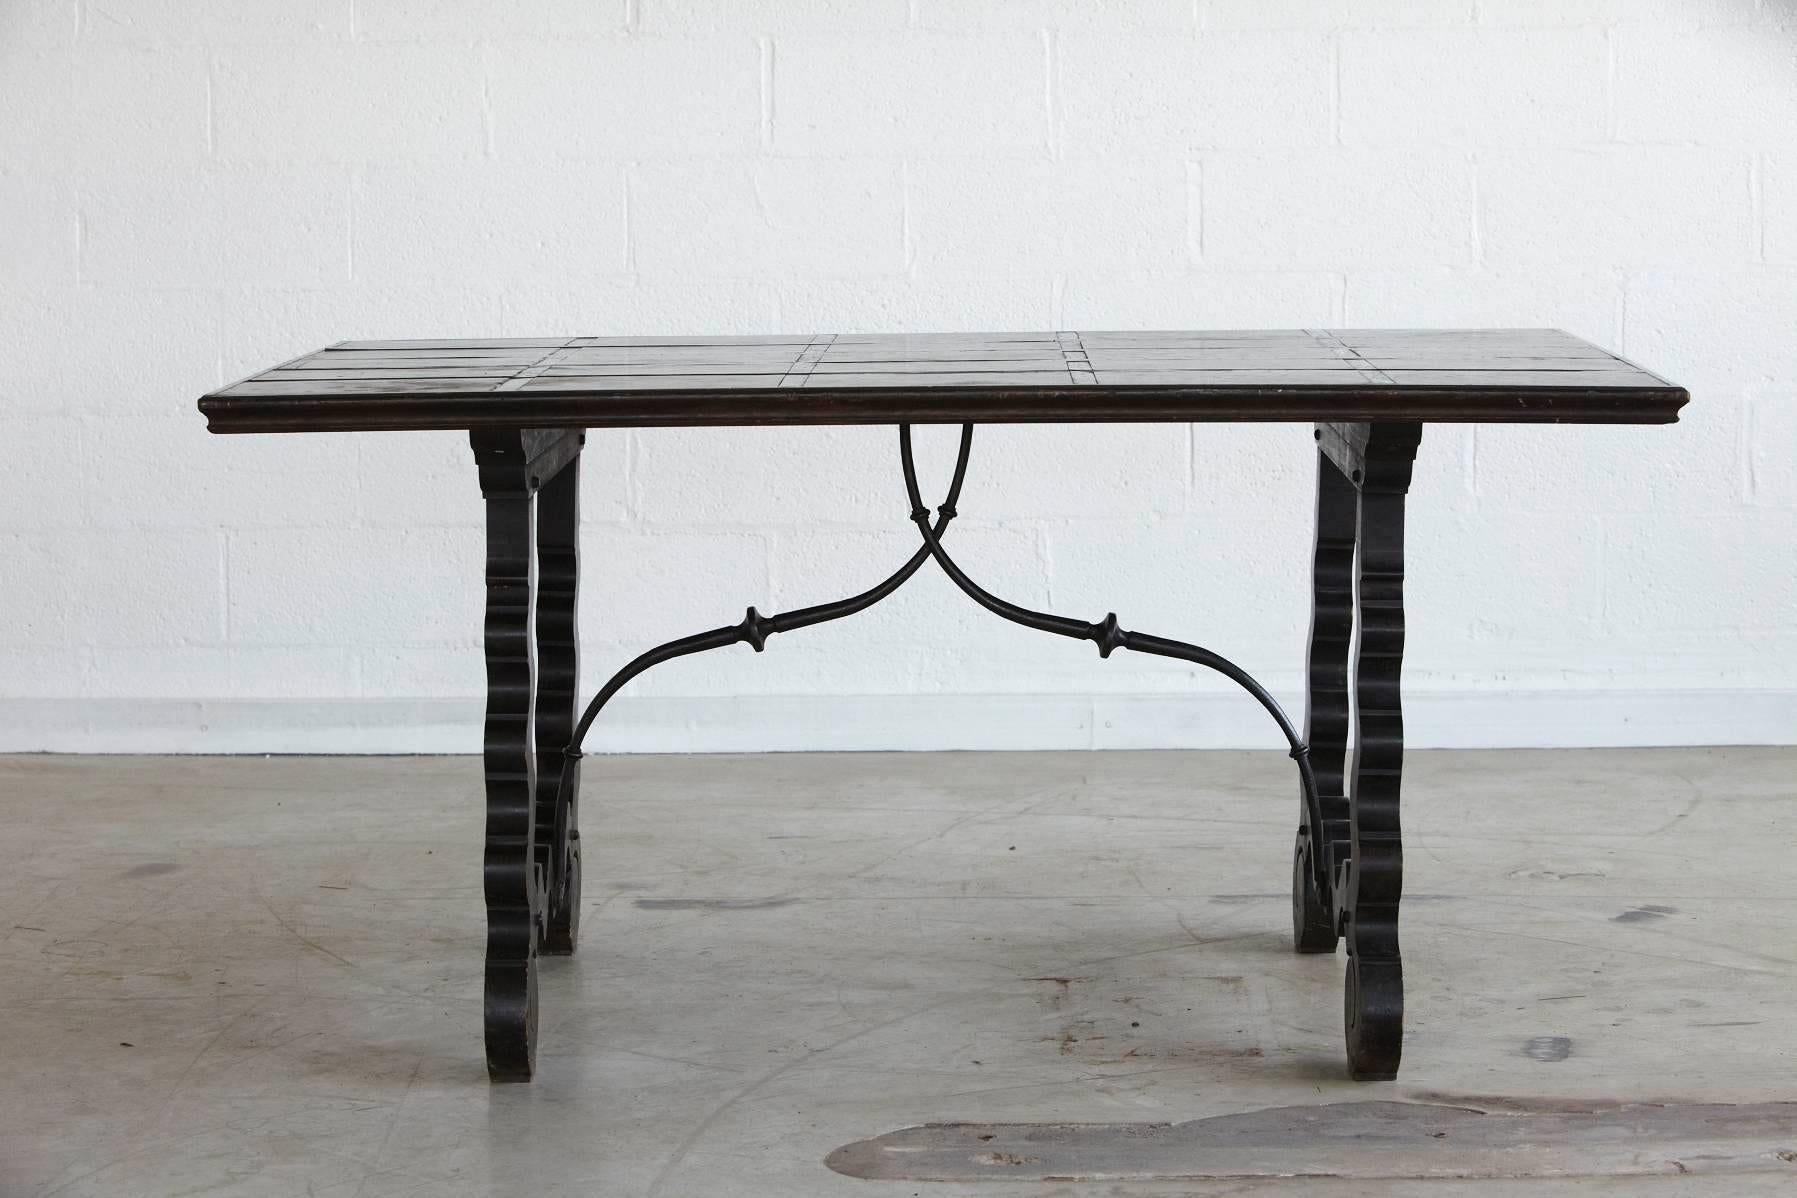 Spanish Colonial style walnut trestle table with carved legs, scrolled iron stretchers and decorative iron inlays in tabletop, circa 1960s.
Perfect as small dining table, library table or generous desk.
  